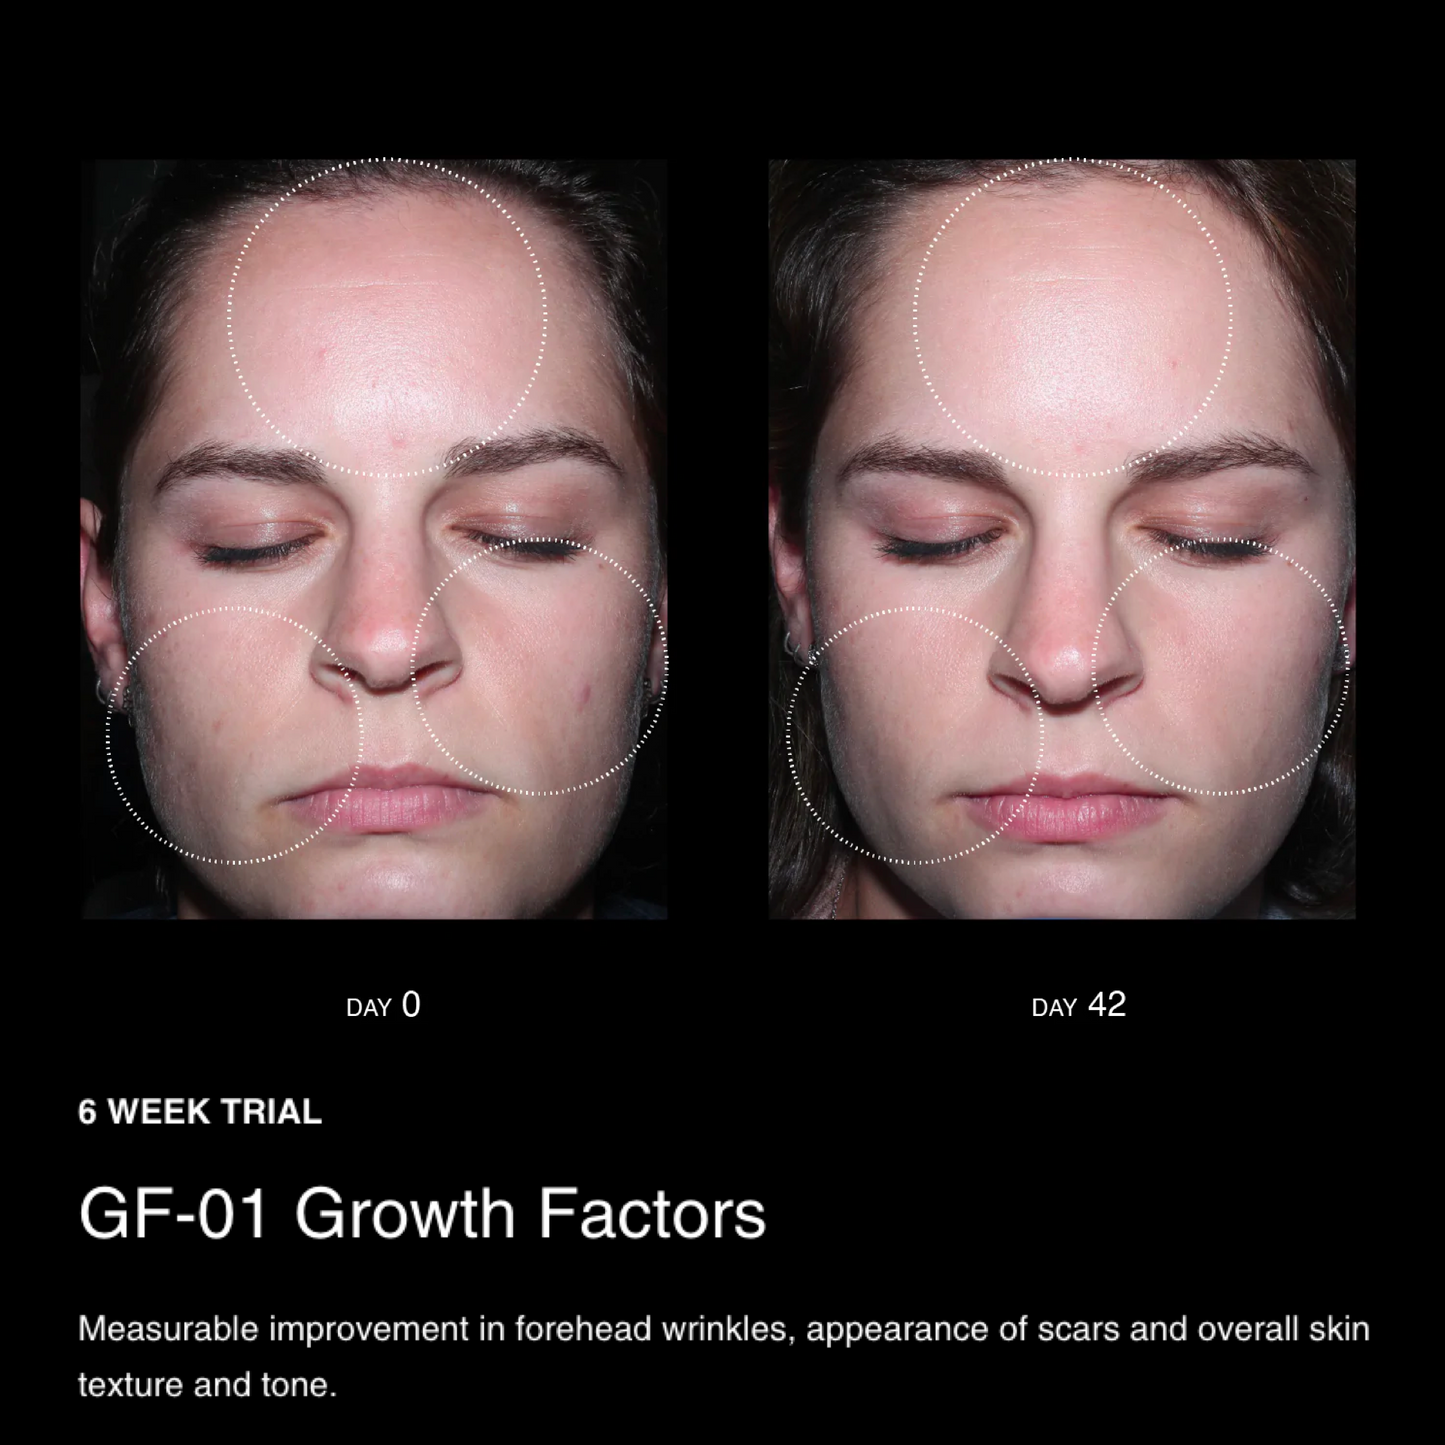 BioActive Growth Factors Set: curated by Master Esthetician Penn Smith